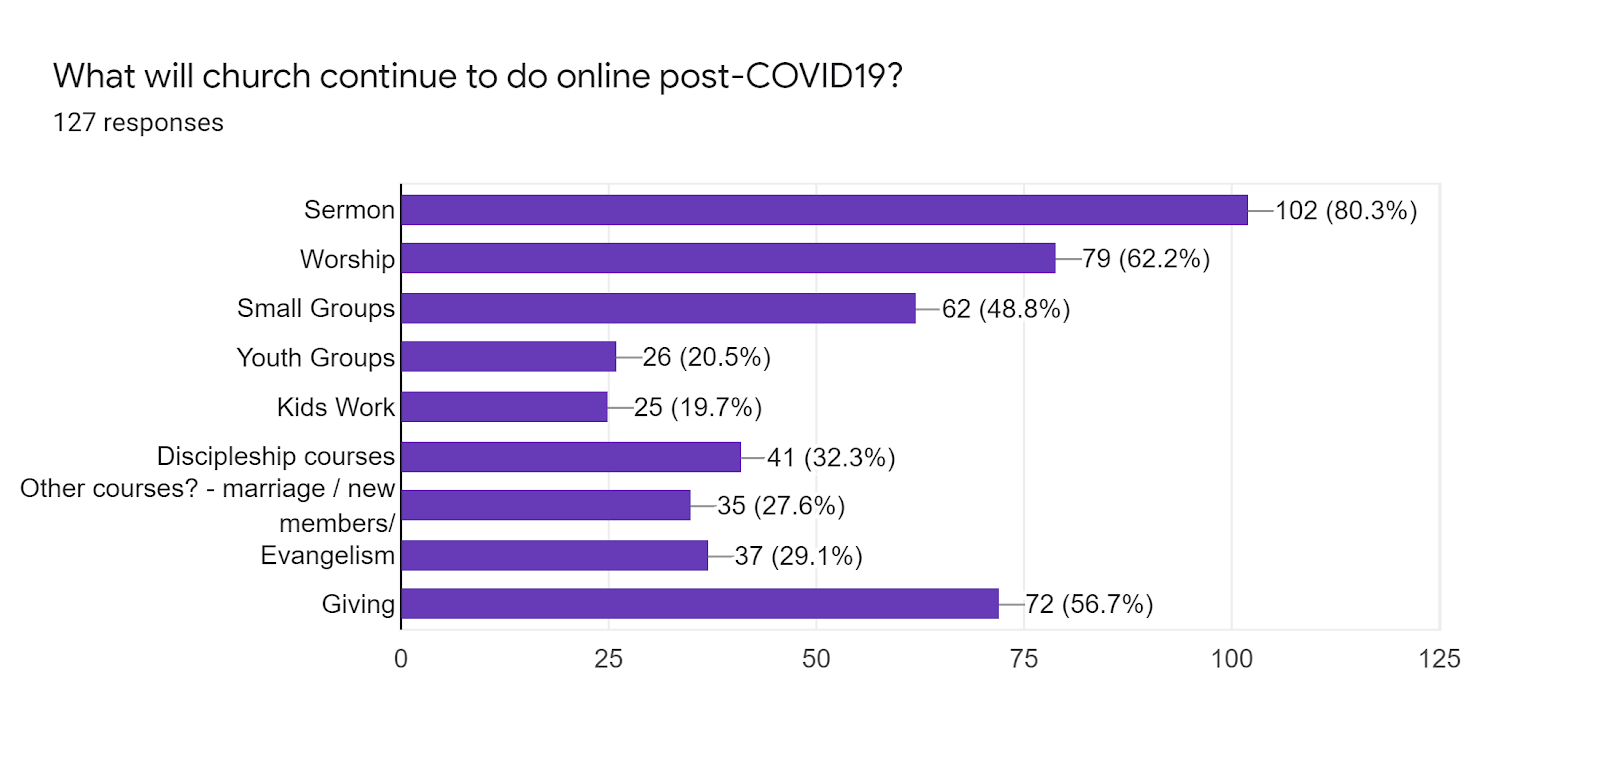 What activities will church continue to do online post-COVID19? Sermons, and financial giving. 